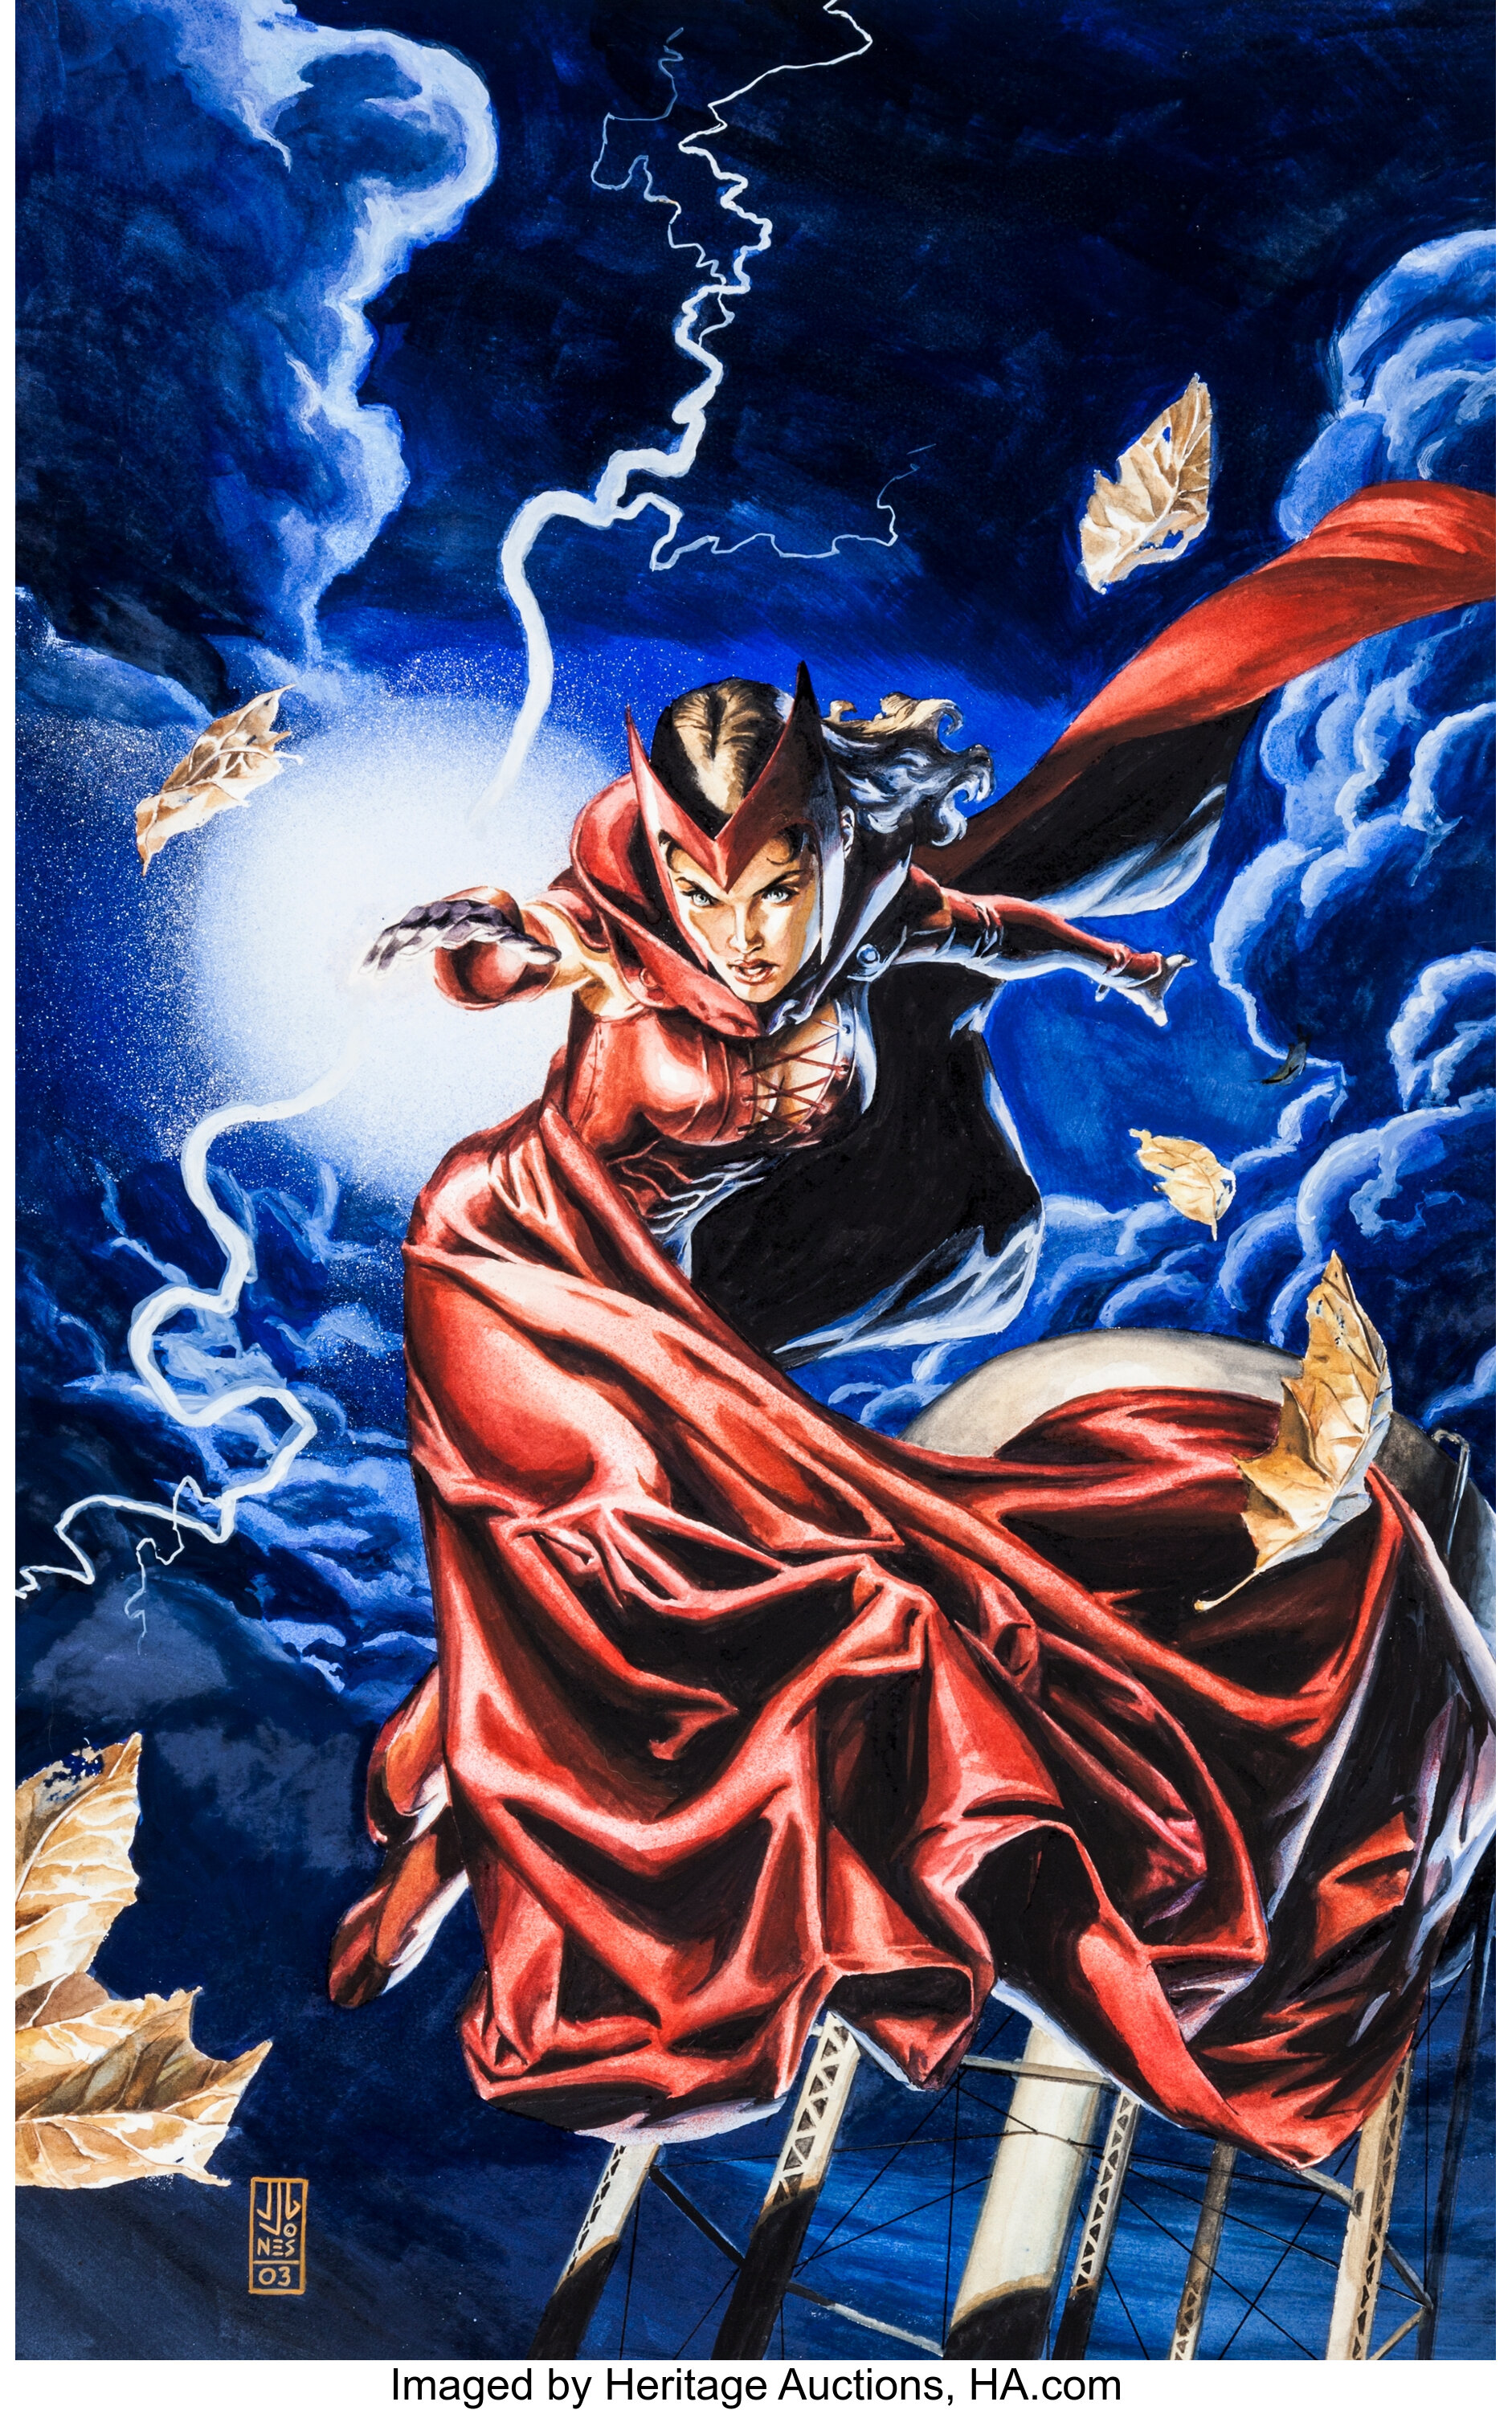 Scarlet Witching — marvel-dc-art: Scarlet Witch #8 (2016) art by